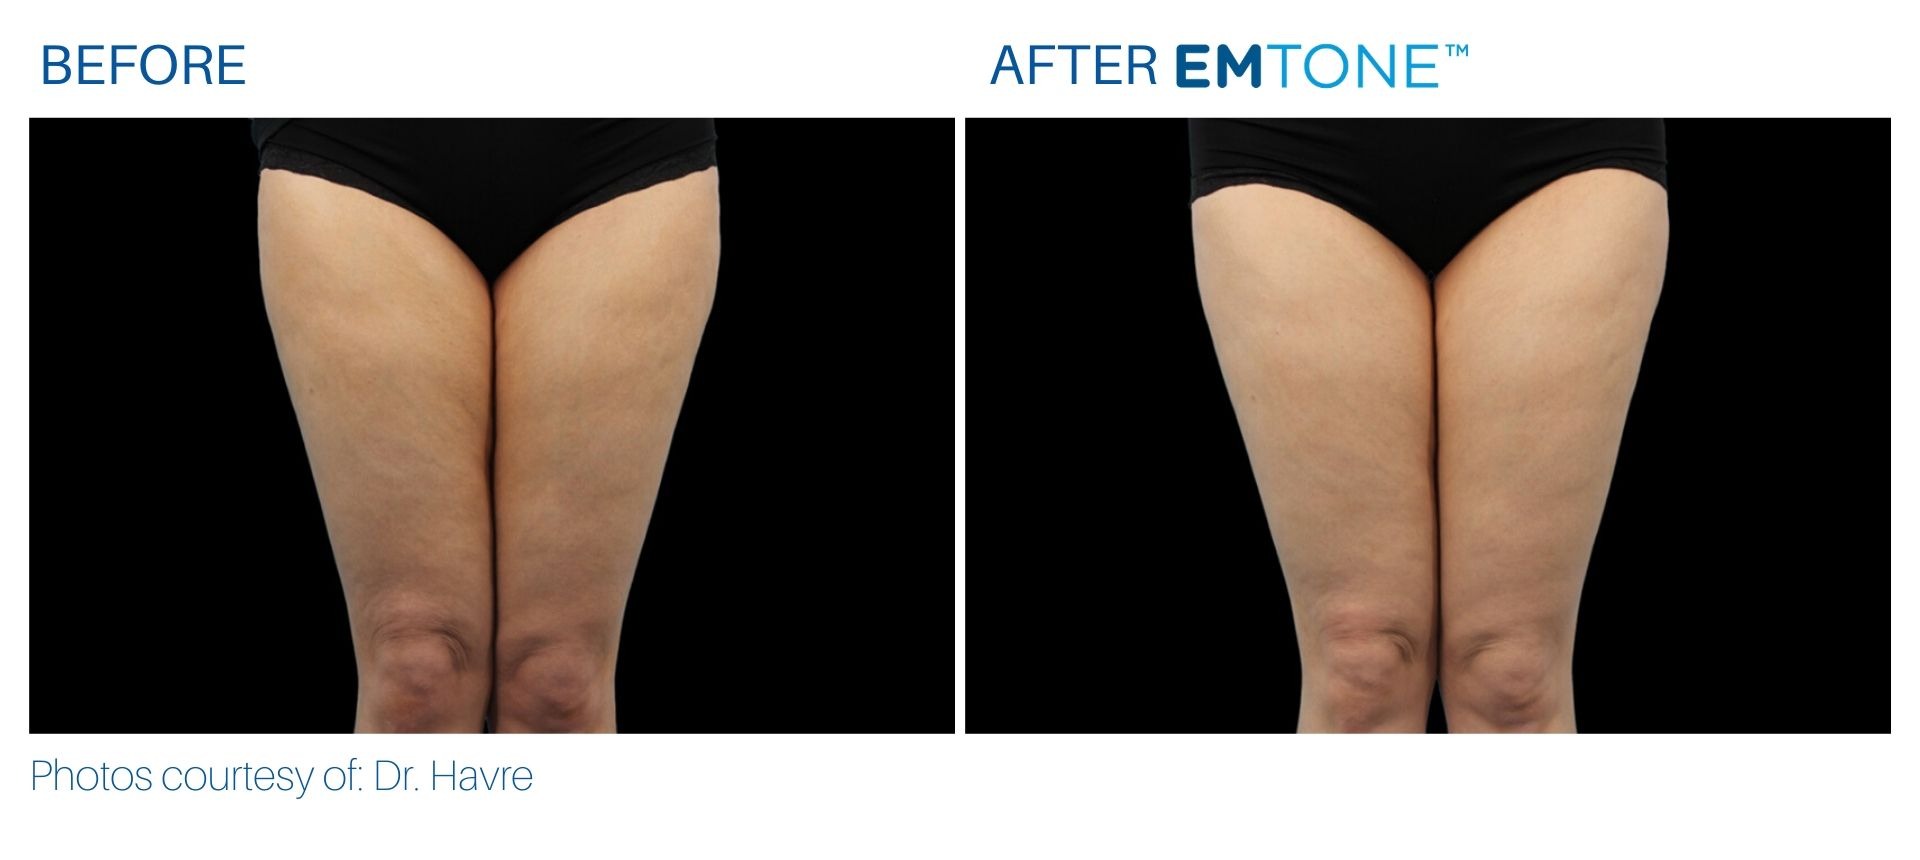 emtone_before_and_after_bodymorphmd_6